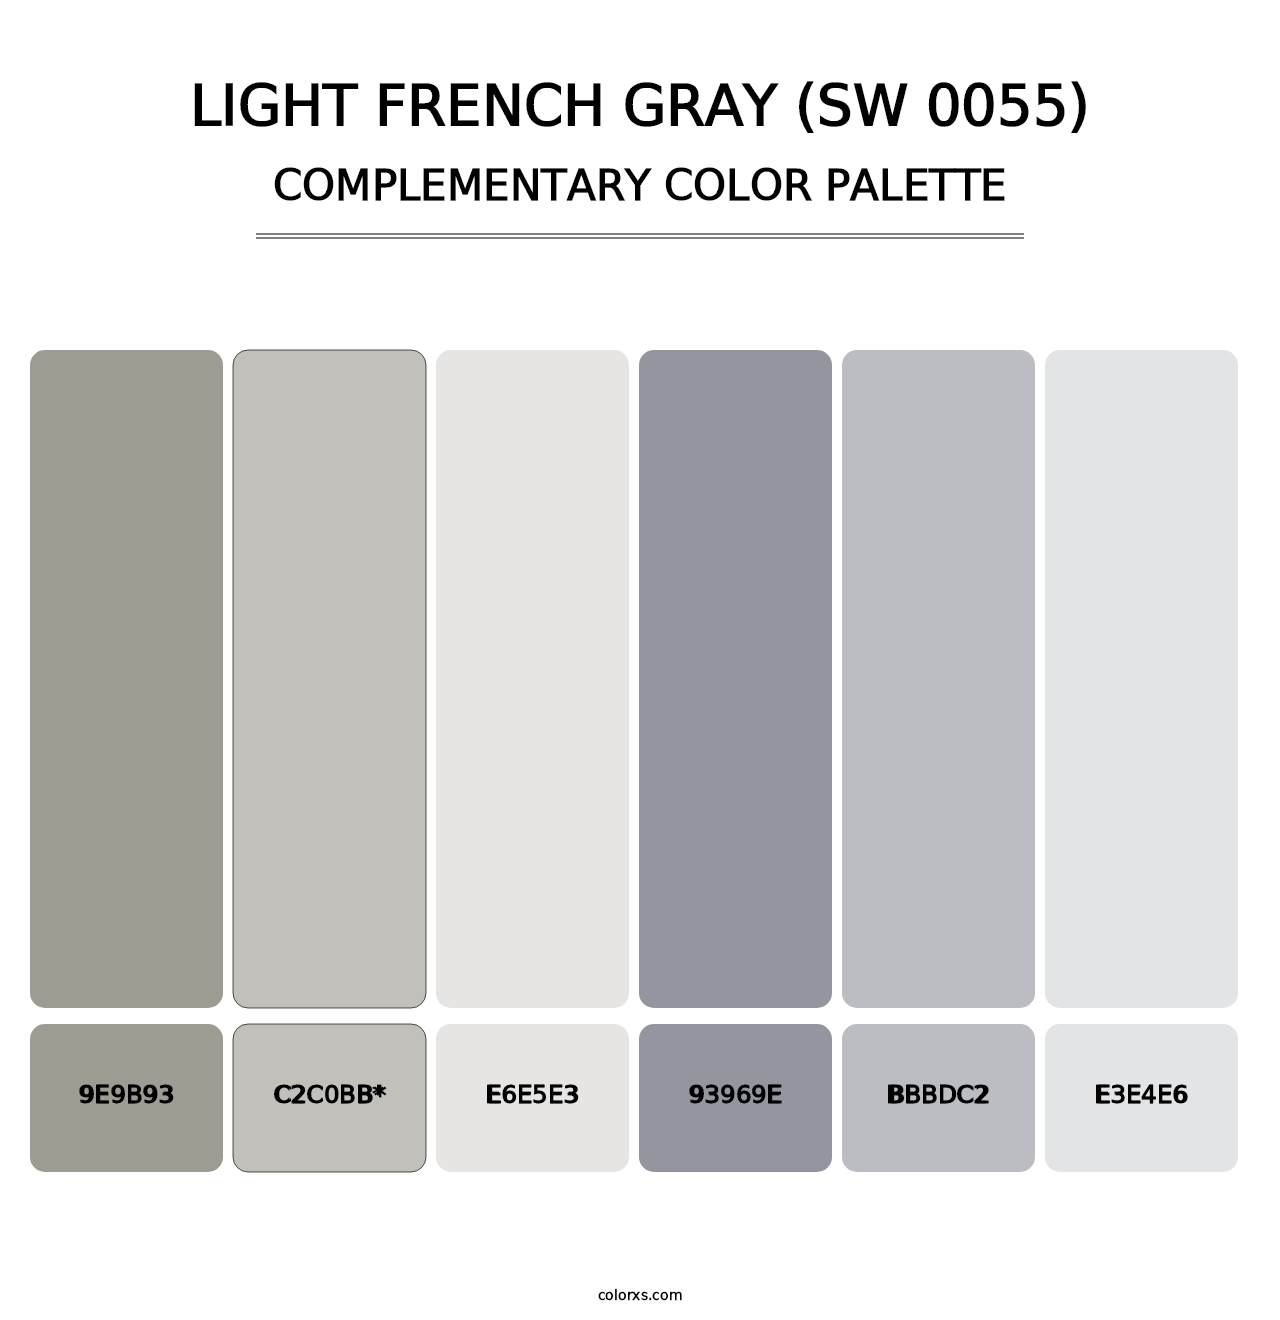 Light French Gray (SW 0055) - Complementary Color Palette